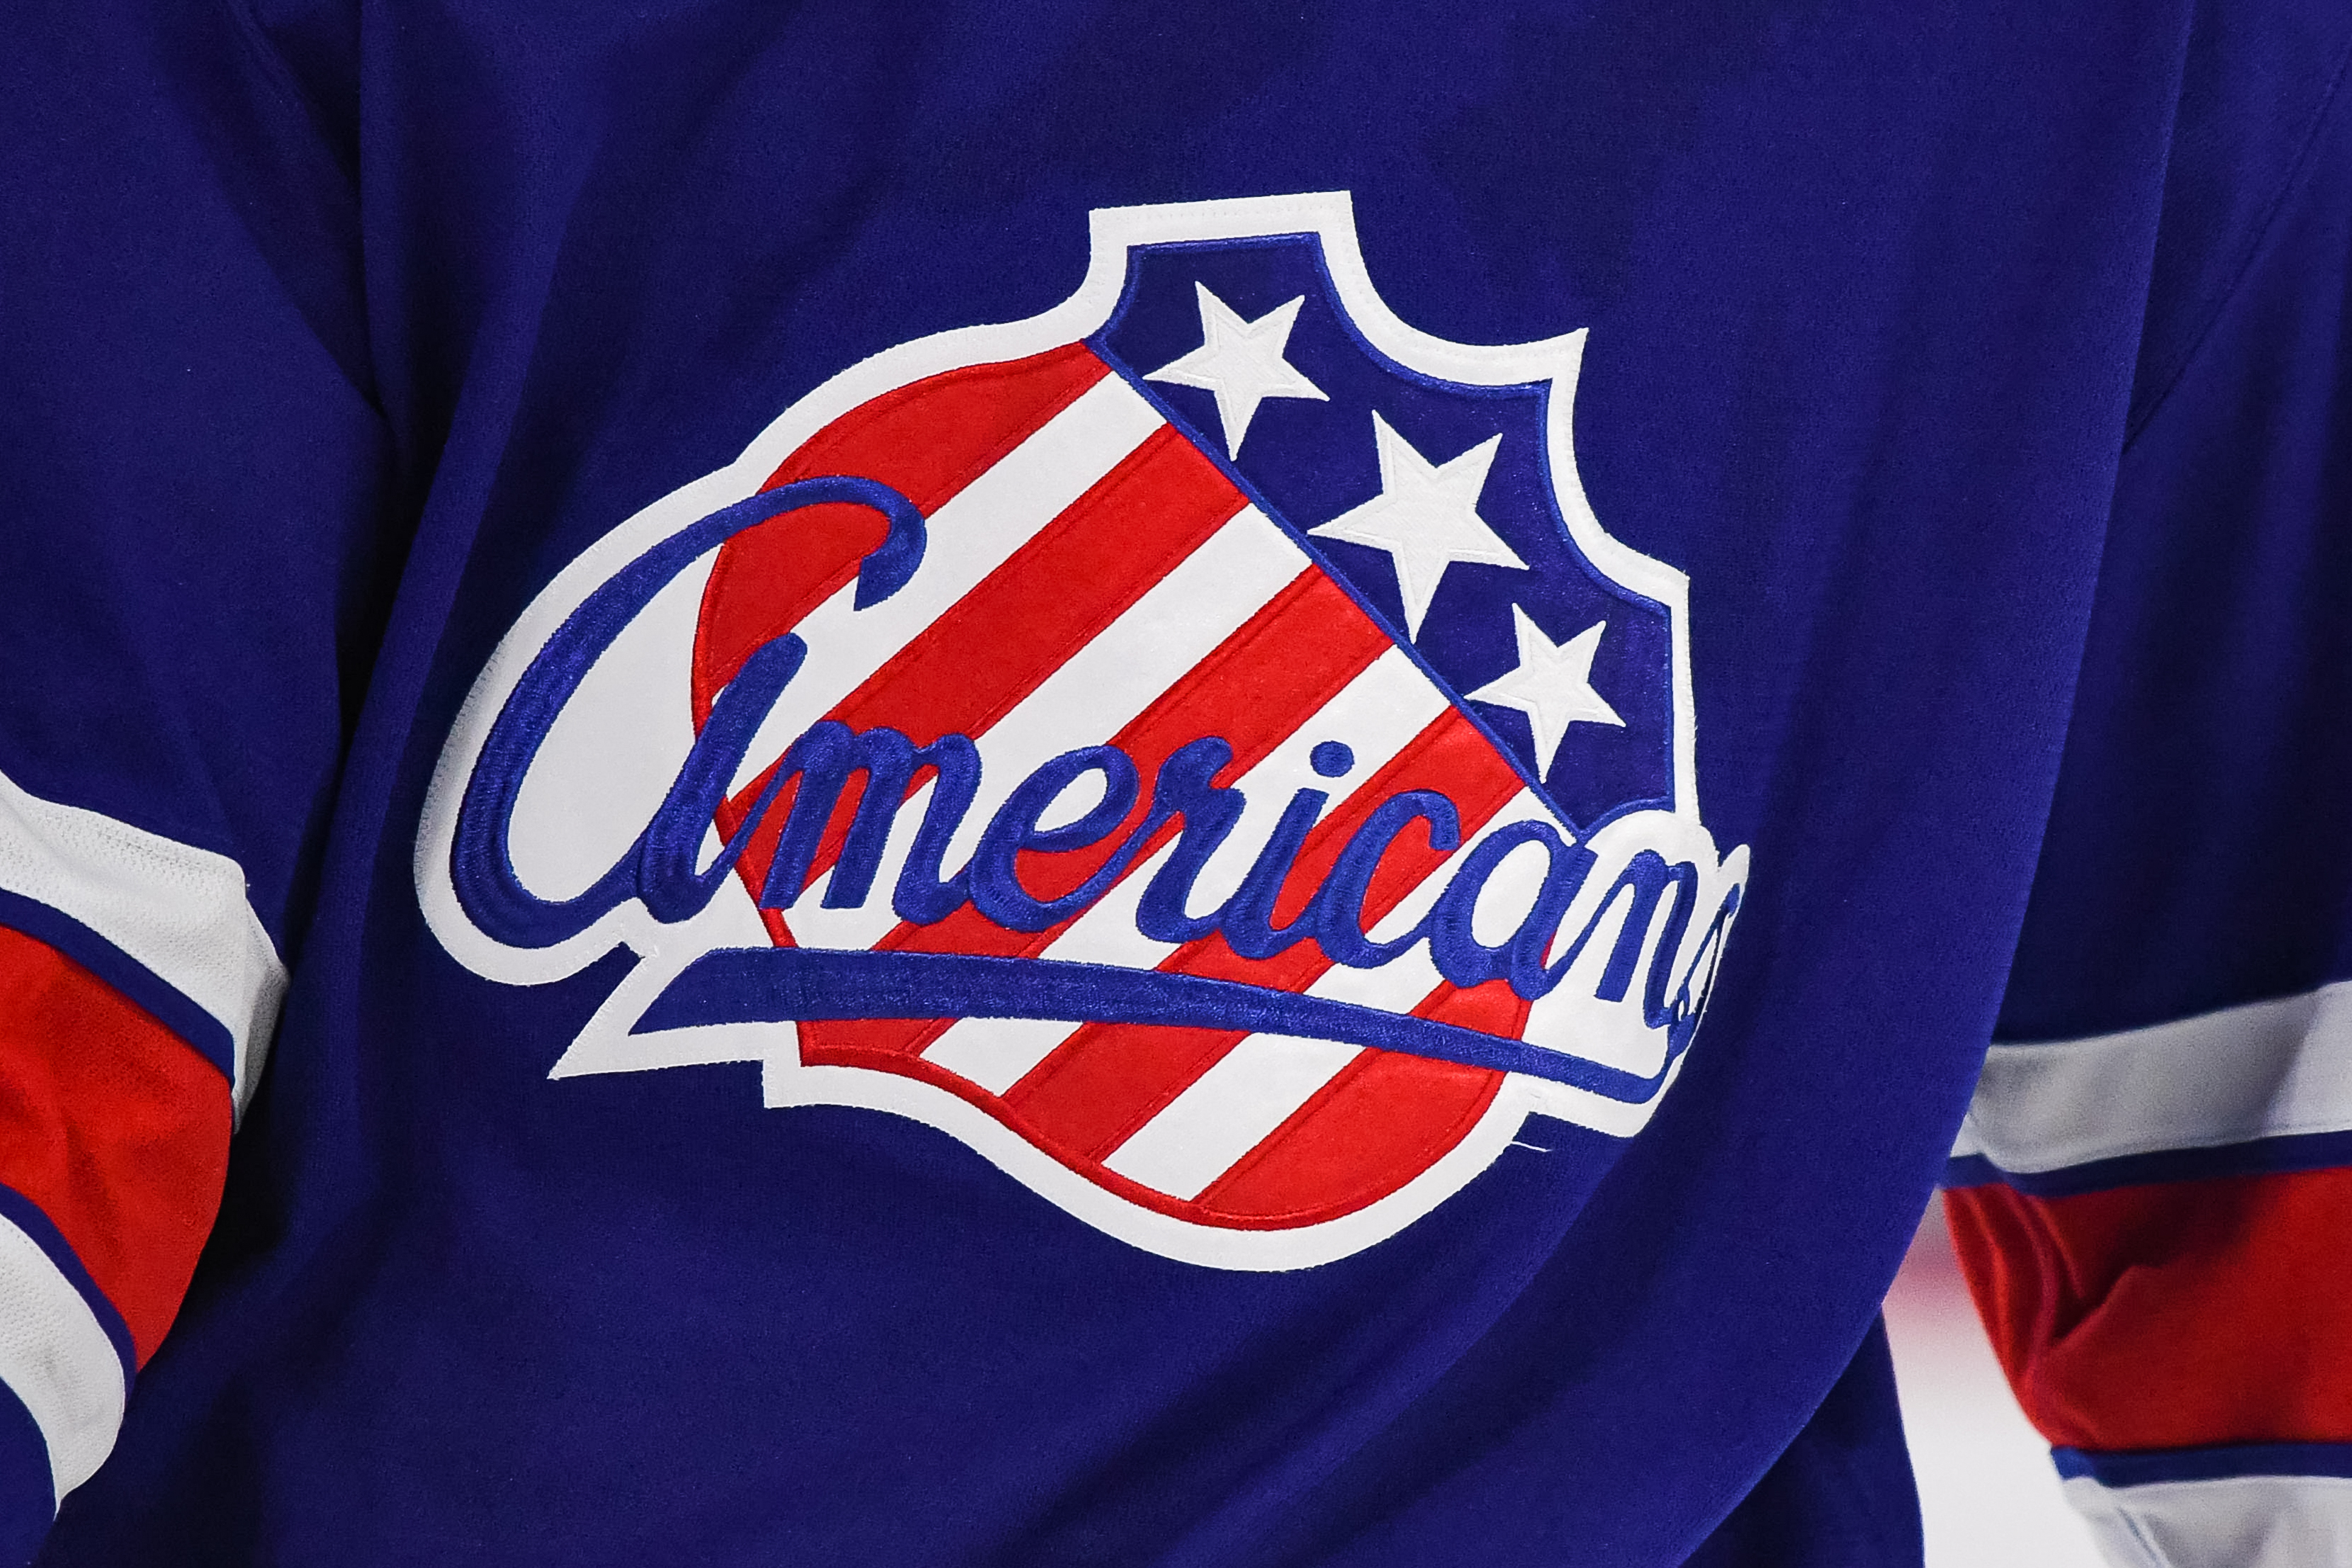 AHL: OCT 30 Rochester Americans at Laval Rocket